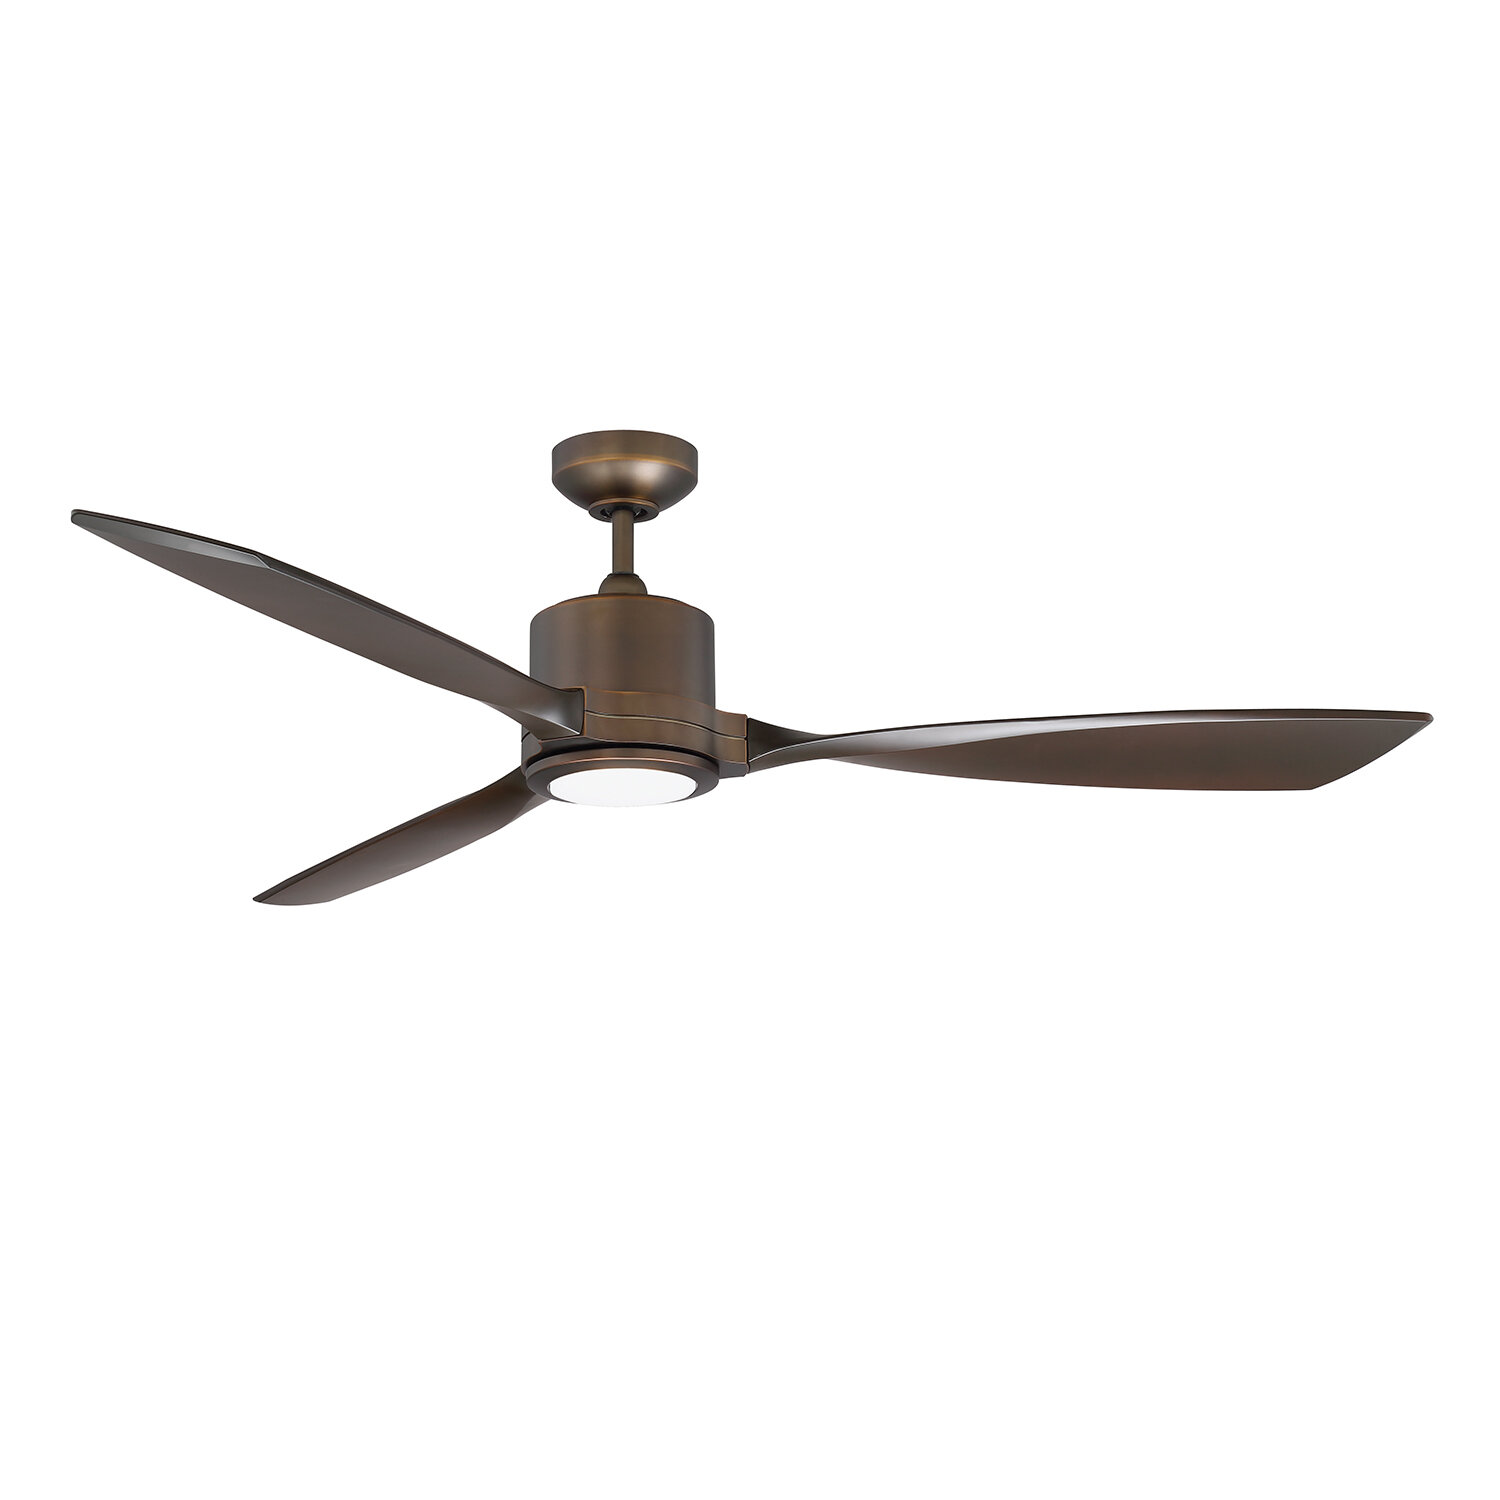 17 Stories 60 Boylston 3 Blade Led Propeller Ceiling Fan With Remote Control And Light Kit Included Reviews Wayfair